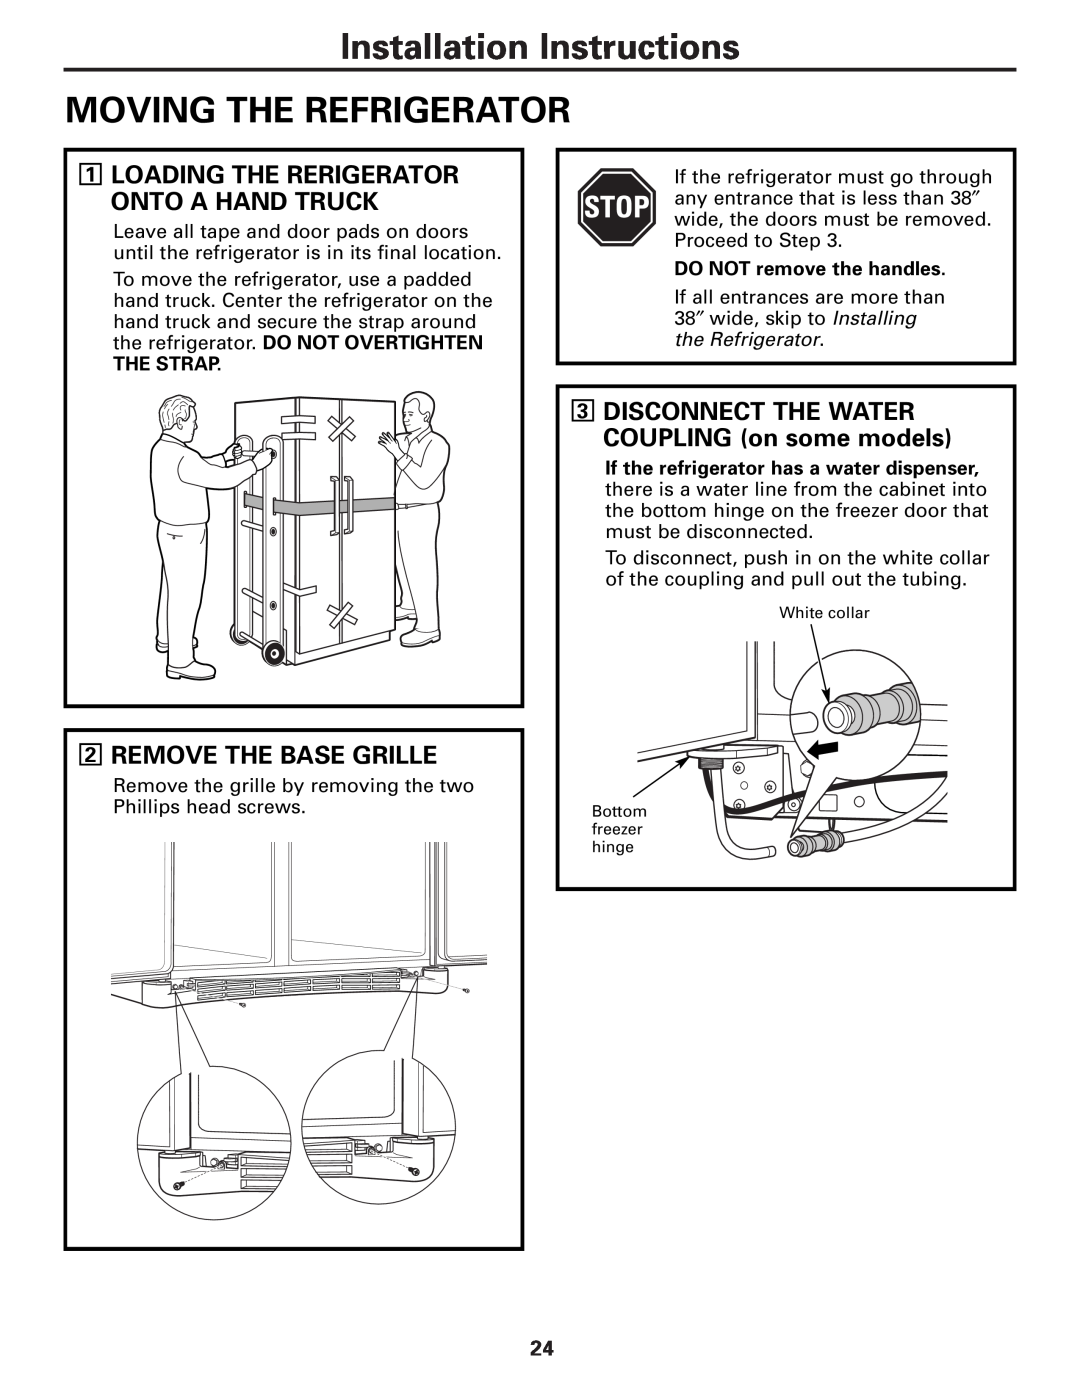 GE 49-60456, 200D8074P009 manual Installation Instructions, Moving The Refrigerator, Remove The Base Grille, The Strap 